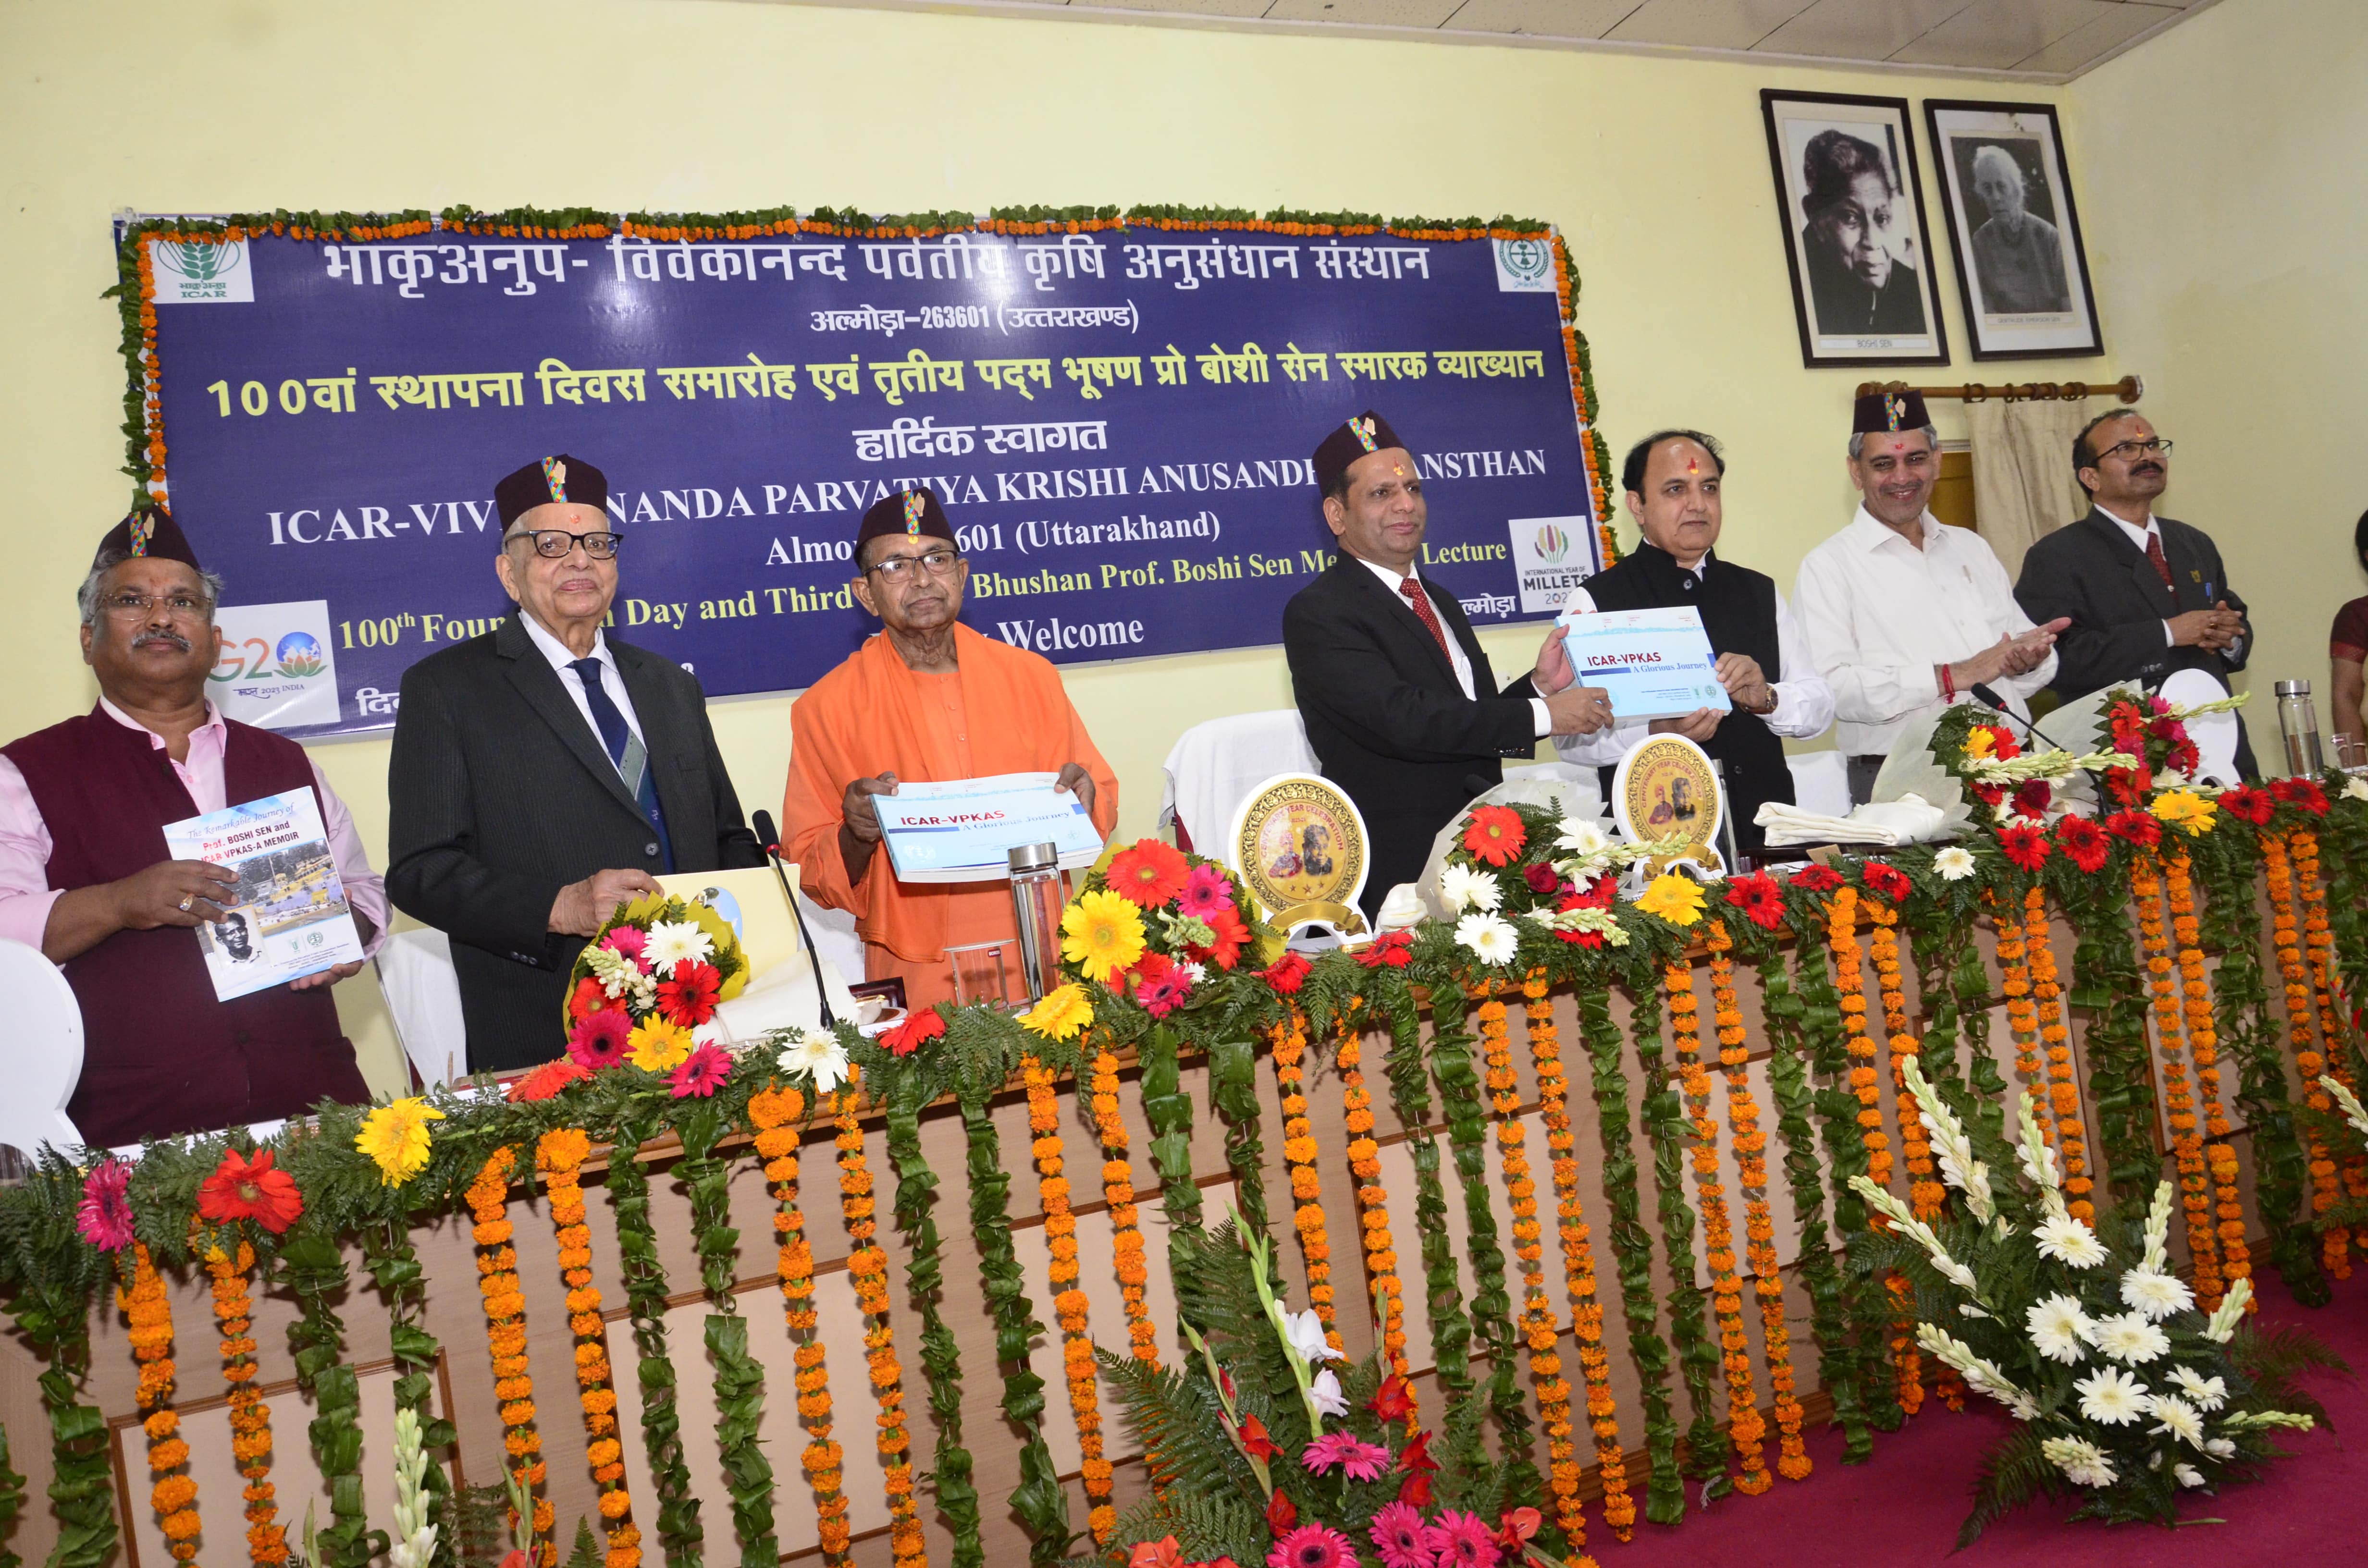 Image Of 100th Foundation Day20